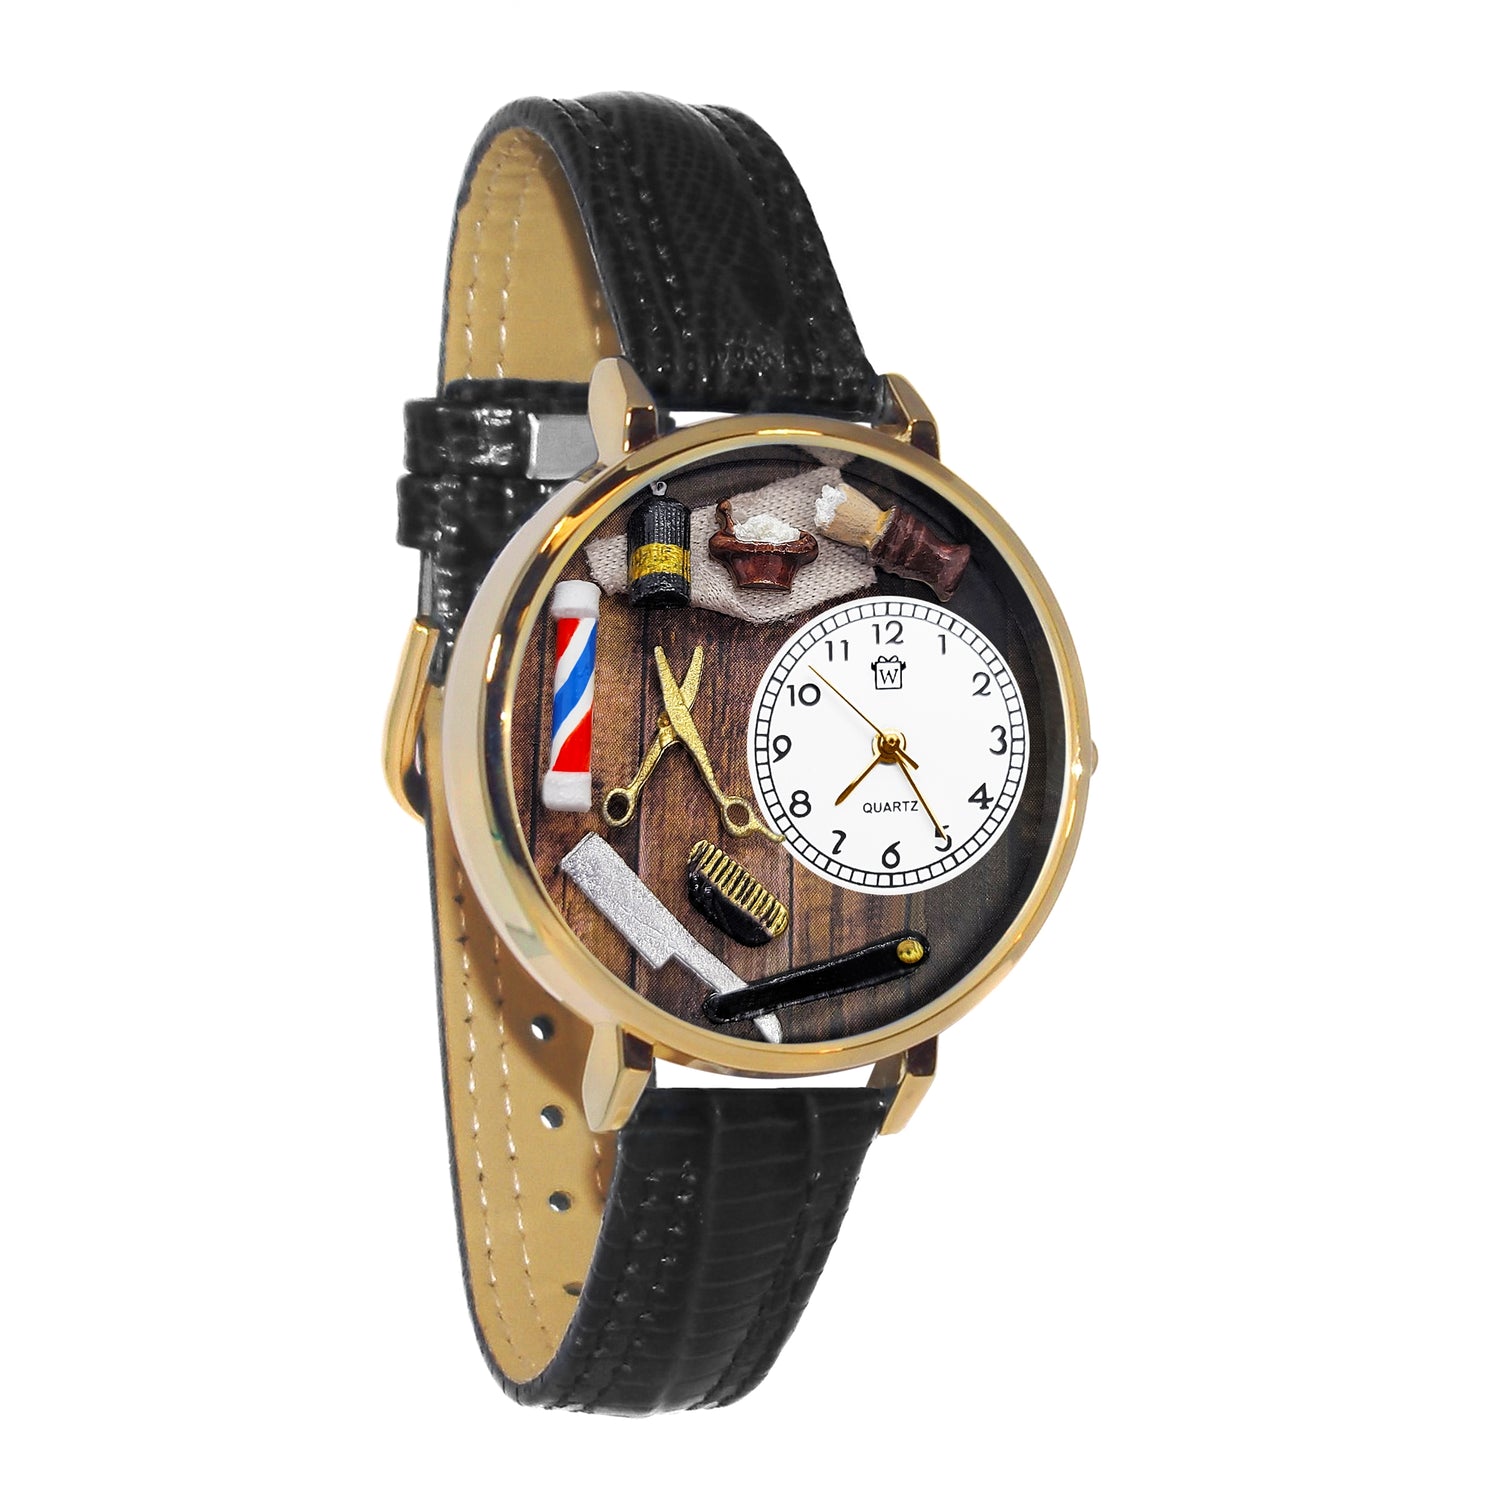 Whimsical Gifts | Barber 3D Watch Large Style | Handmade in USA | Professions Themed | Salon & Spa Professions | Novelty Unique Fun Miniatures Gift | Gold Finish Black Leather Watch Band